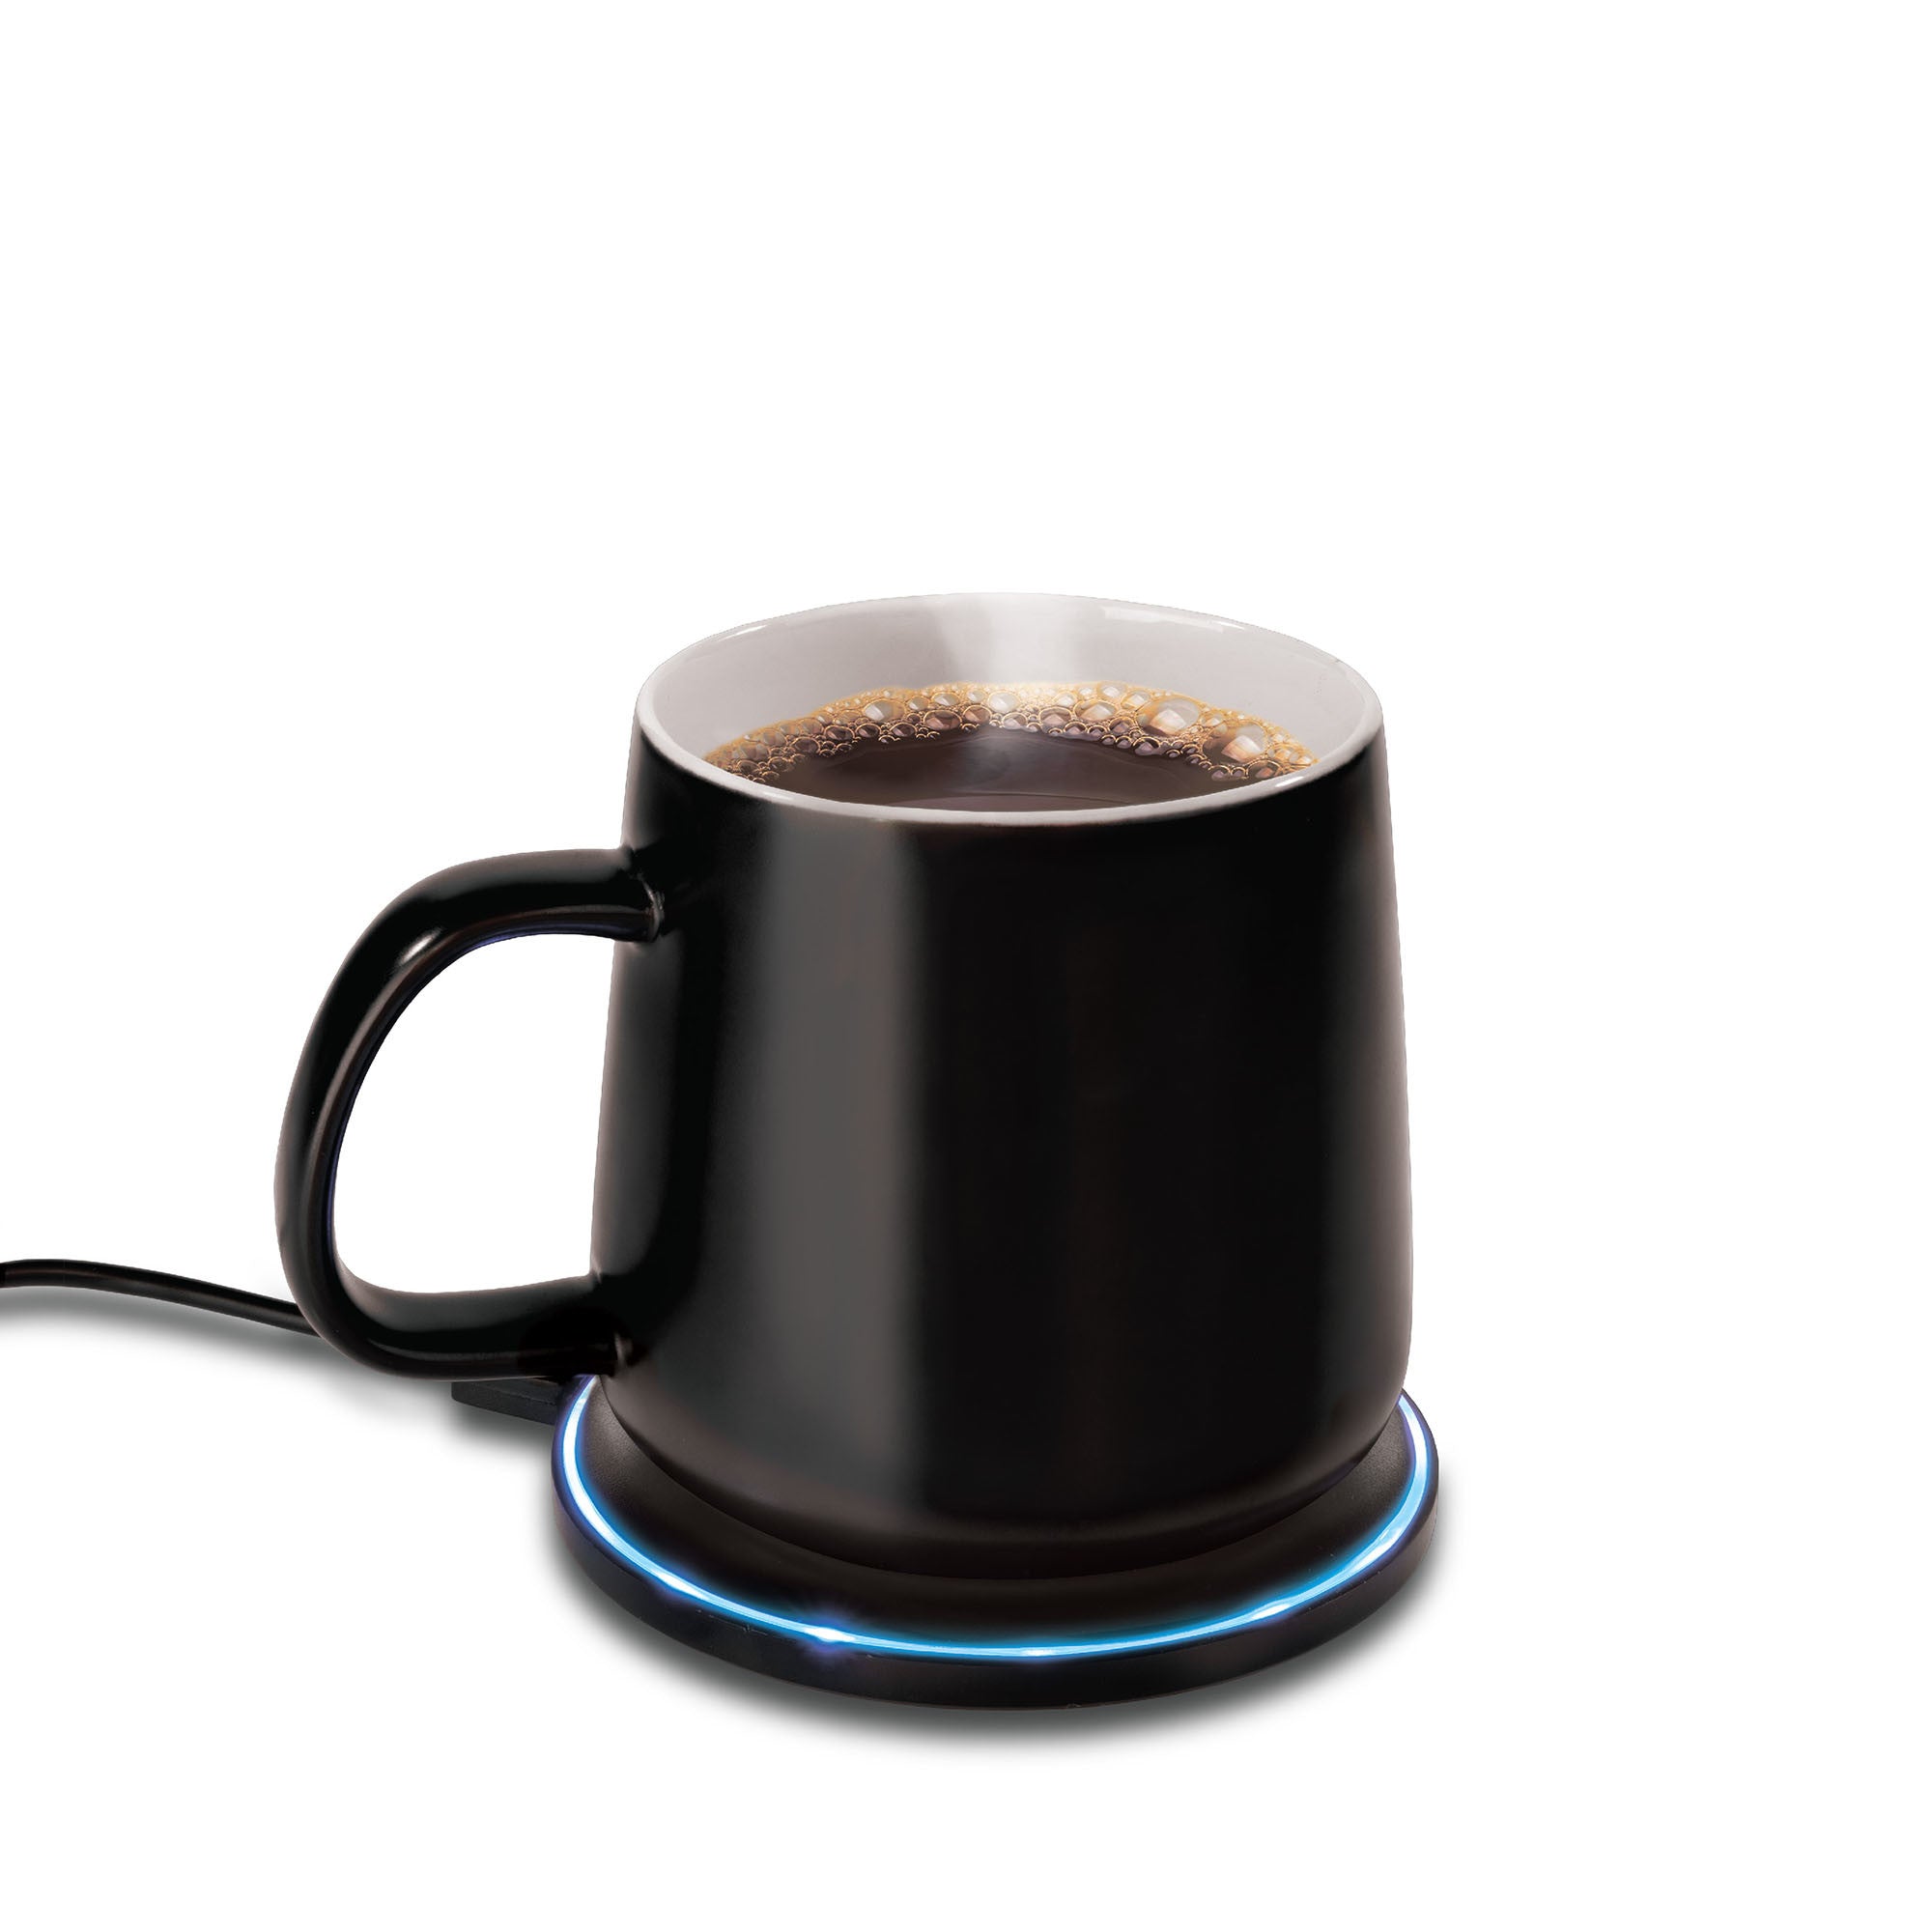 2-In-1 Cup Coffee Warmer and QI Wireless Charger